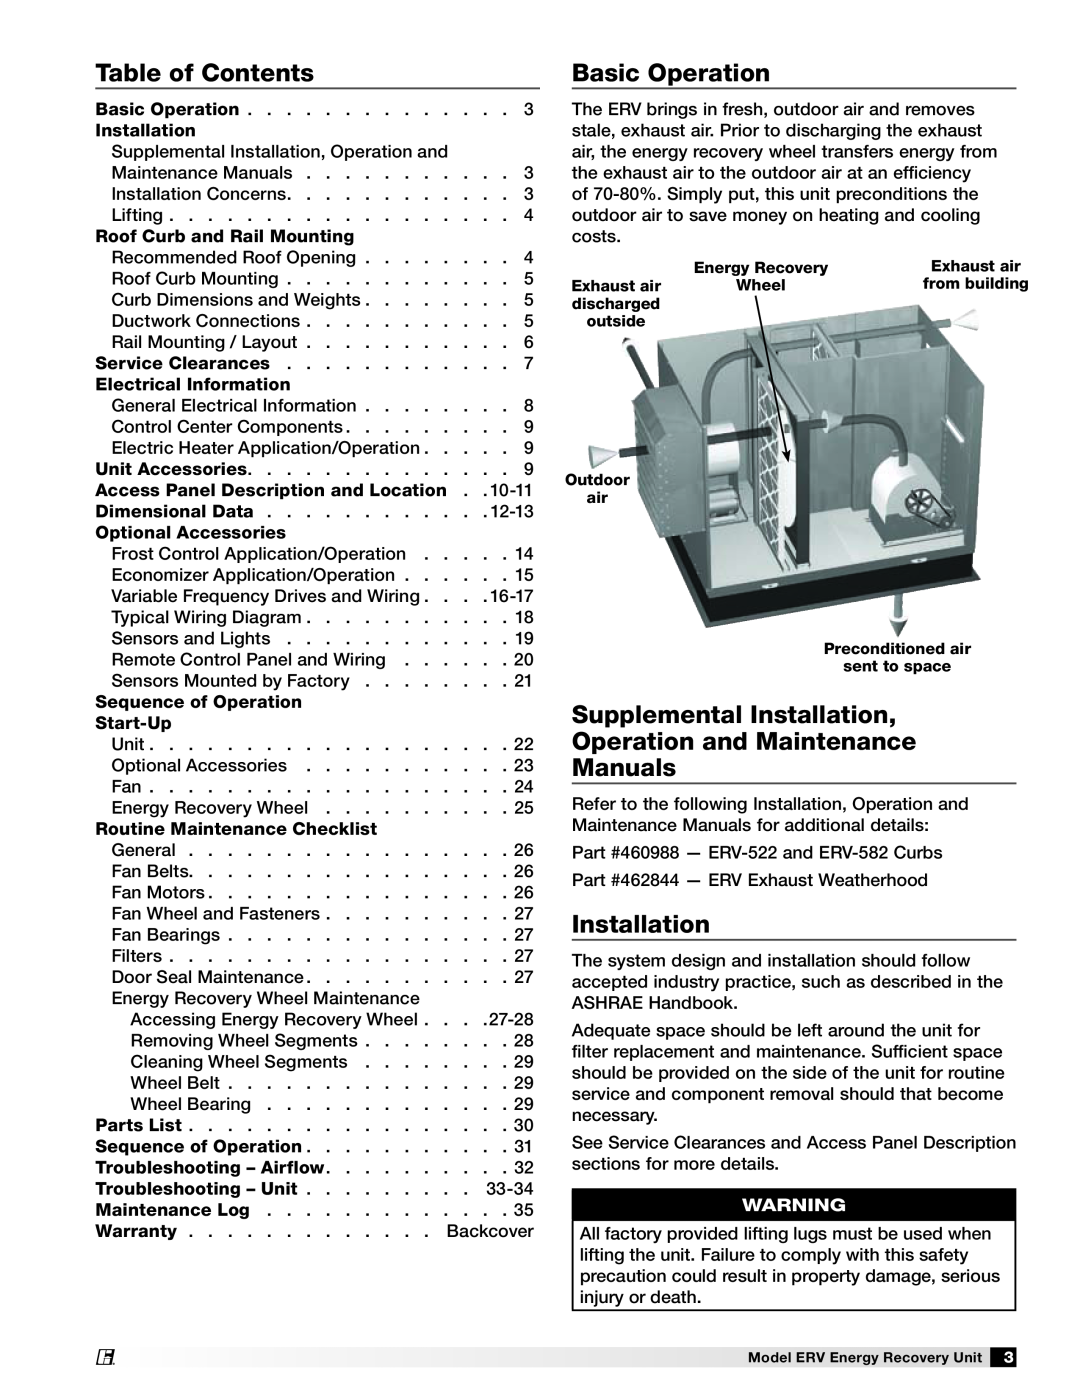 Greenheck Fan ERV-521 Table of Contents, Basic Operation, Supplemental Installation Operation and Maintenance Manuals 